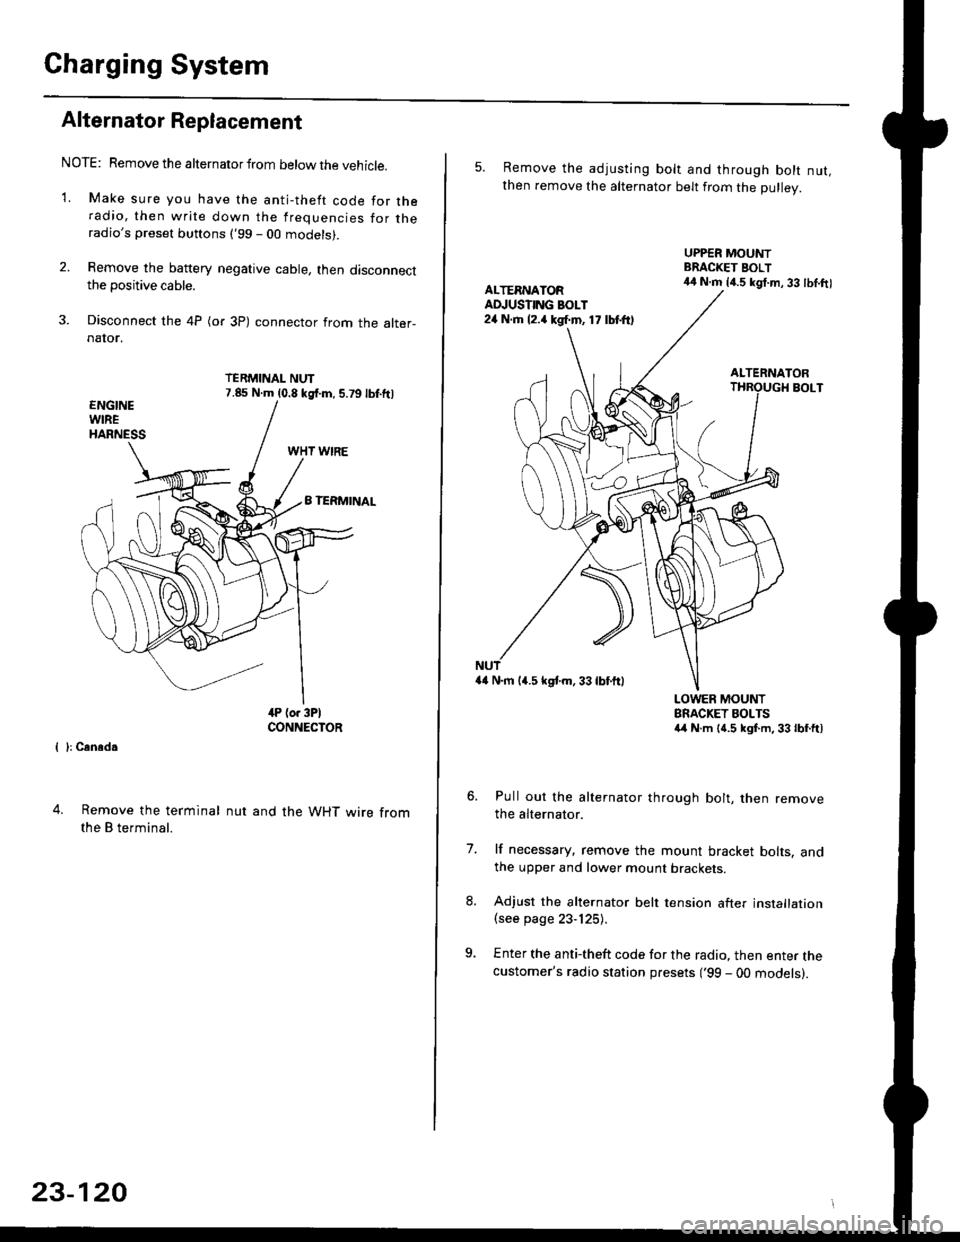 HONDA CIVIC 1999 6.G Owners Manual Charging System
Alternator Replacement
NOTE: Remove the alternator from below the vehicle.
1. Make sure you have the anti-theft code for theradio, then write down the frequencies for theradios prese